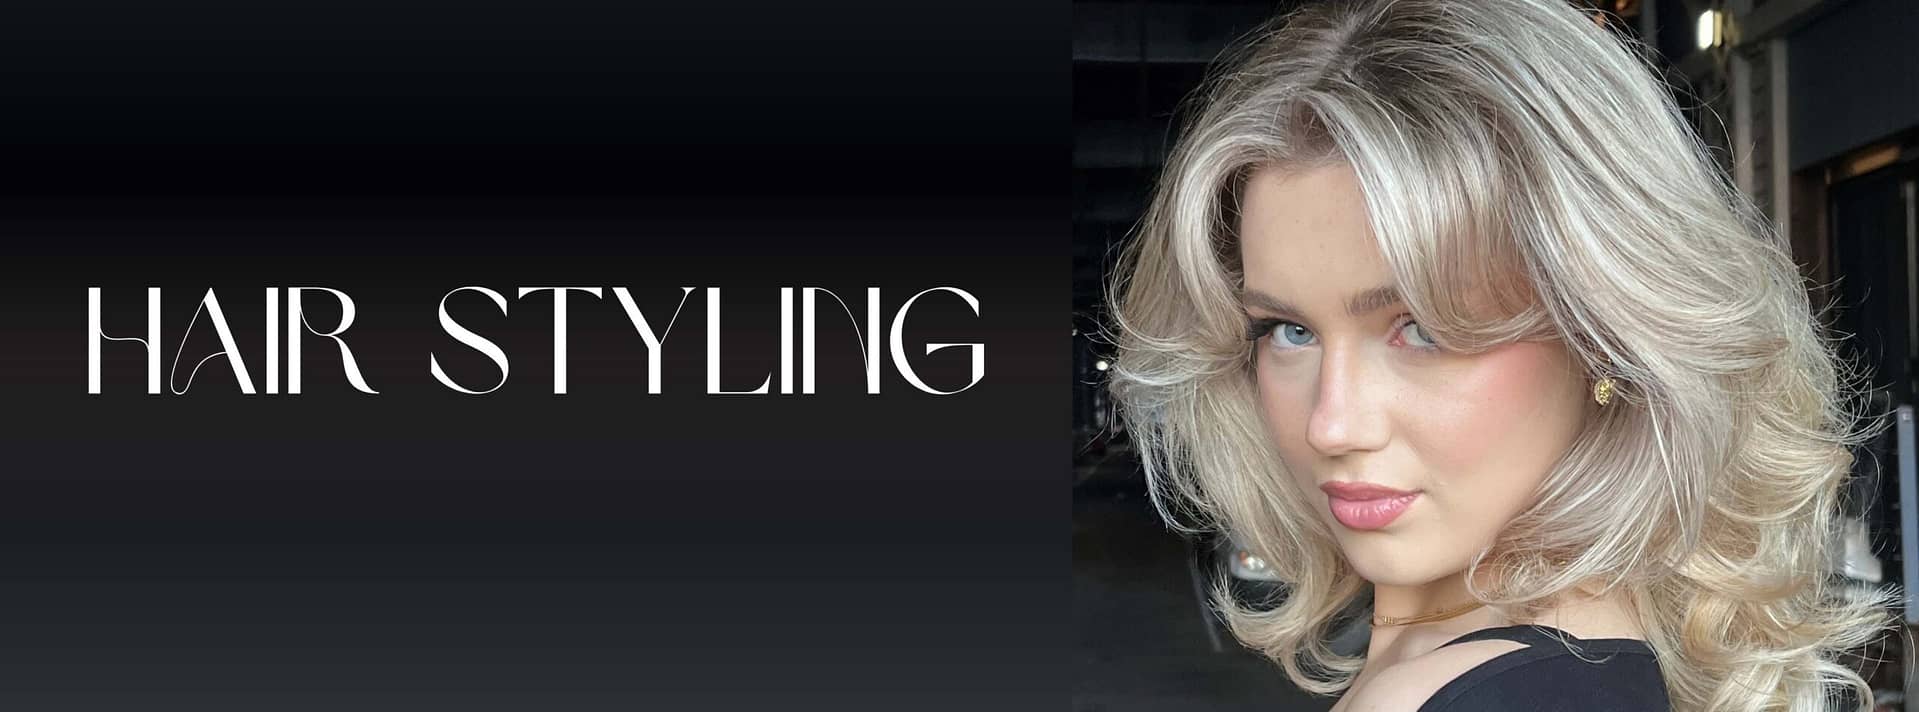 Hair styling products australia banner